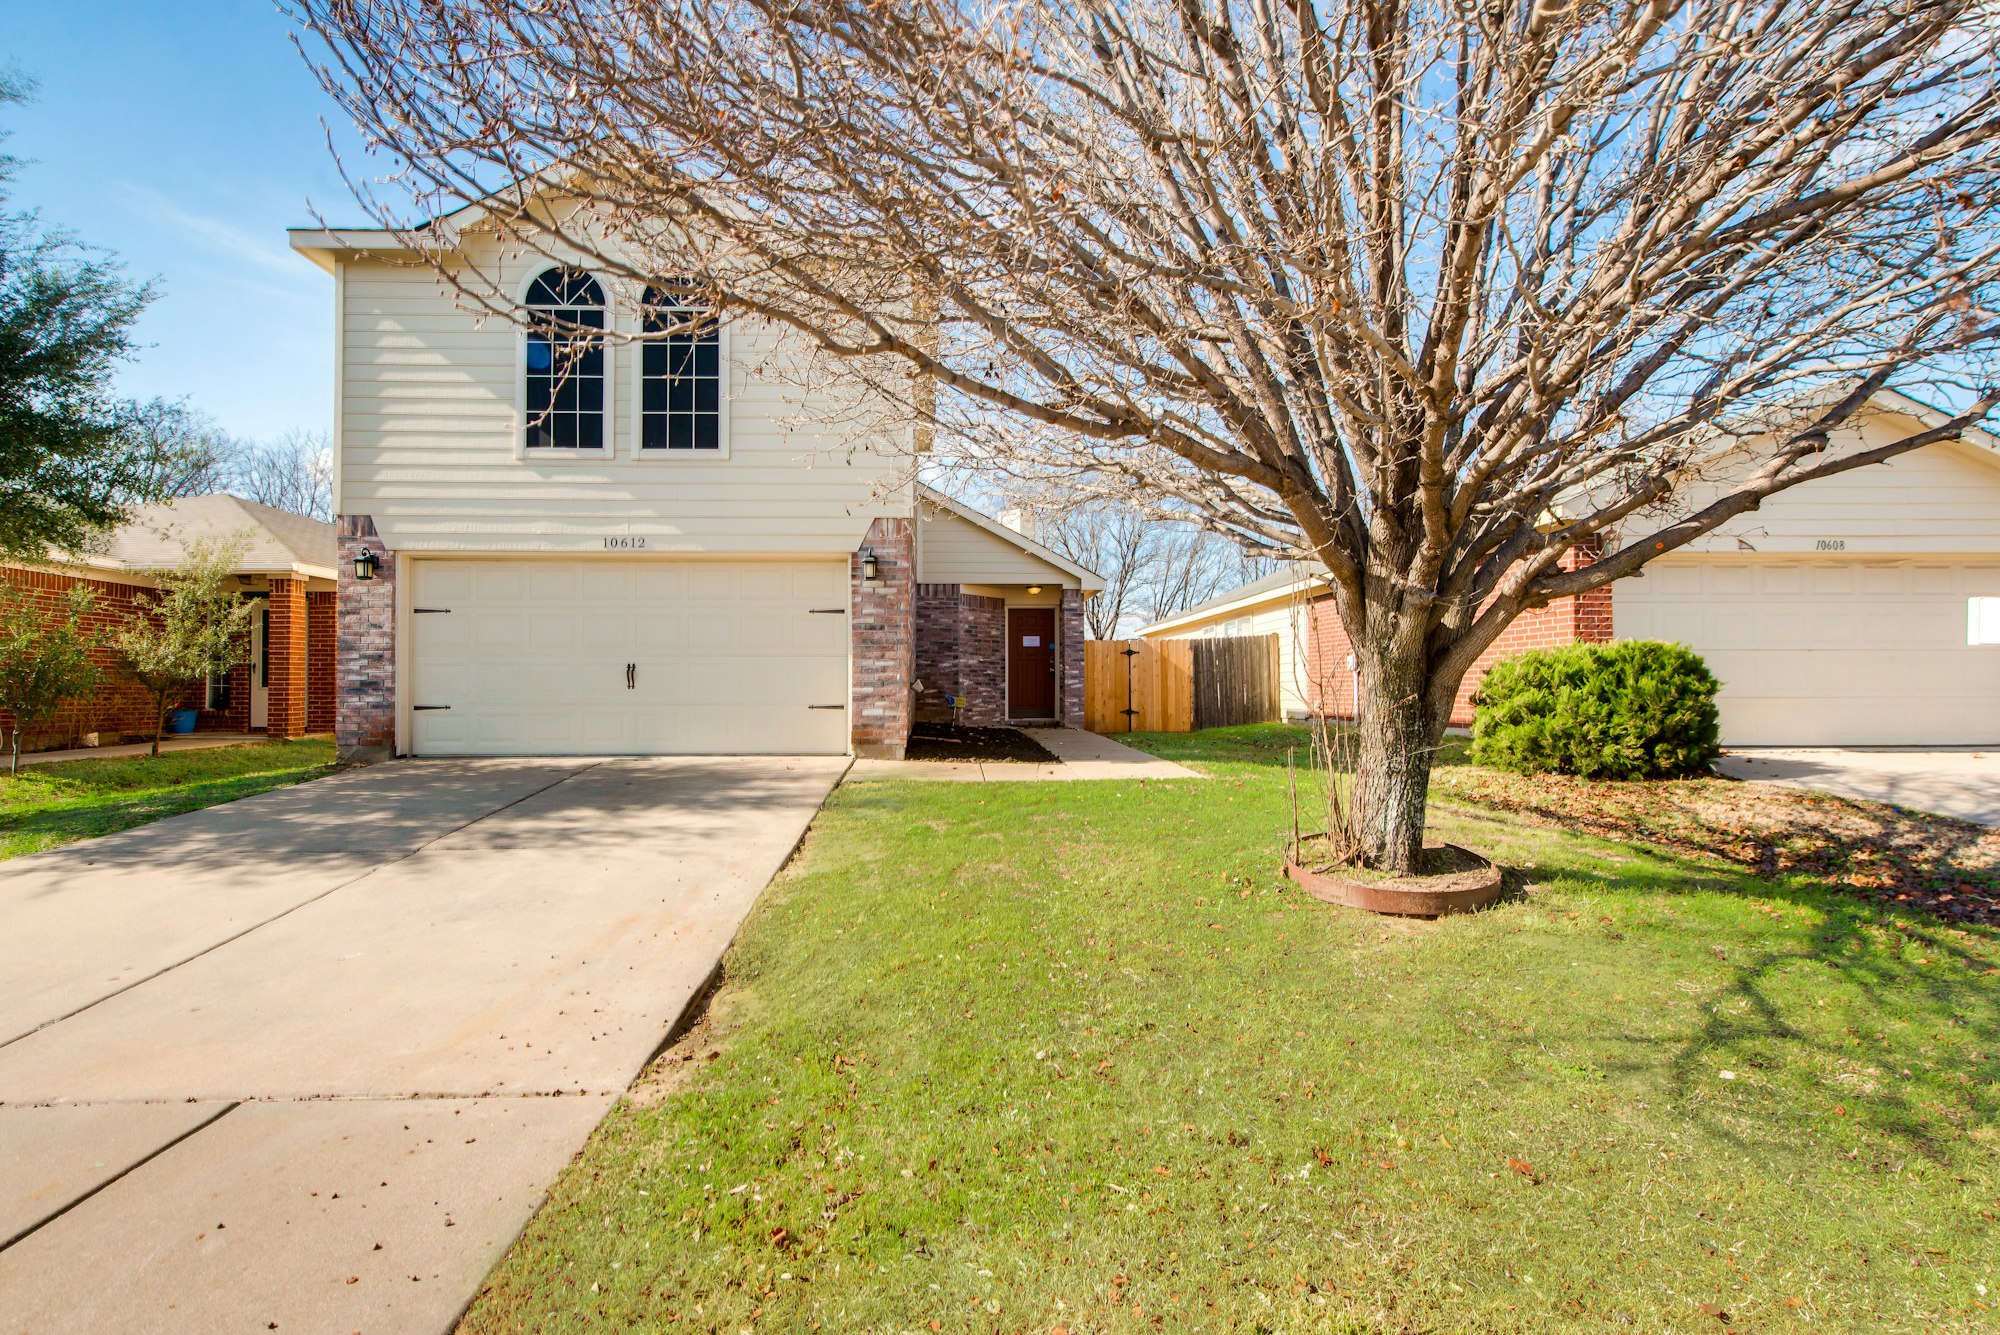 Photo 1 of 25 - 10612 Towerwood Dr, Fort Worth, TX 76140